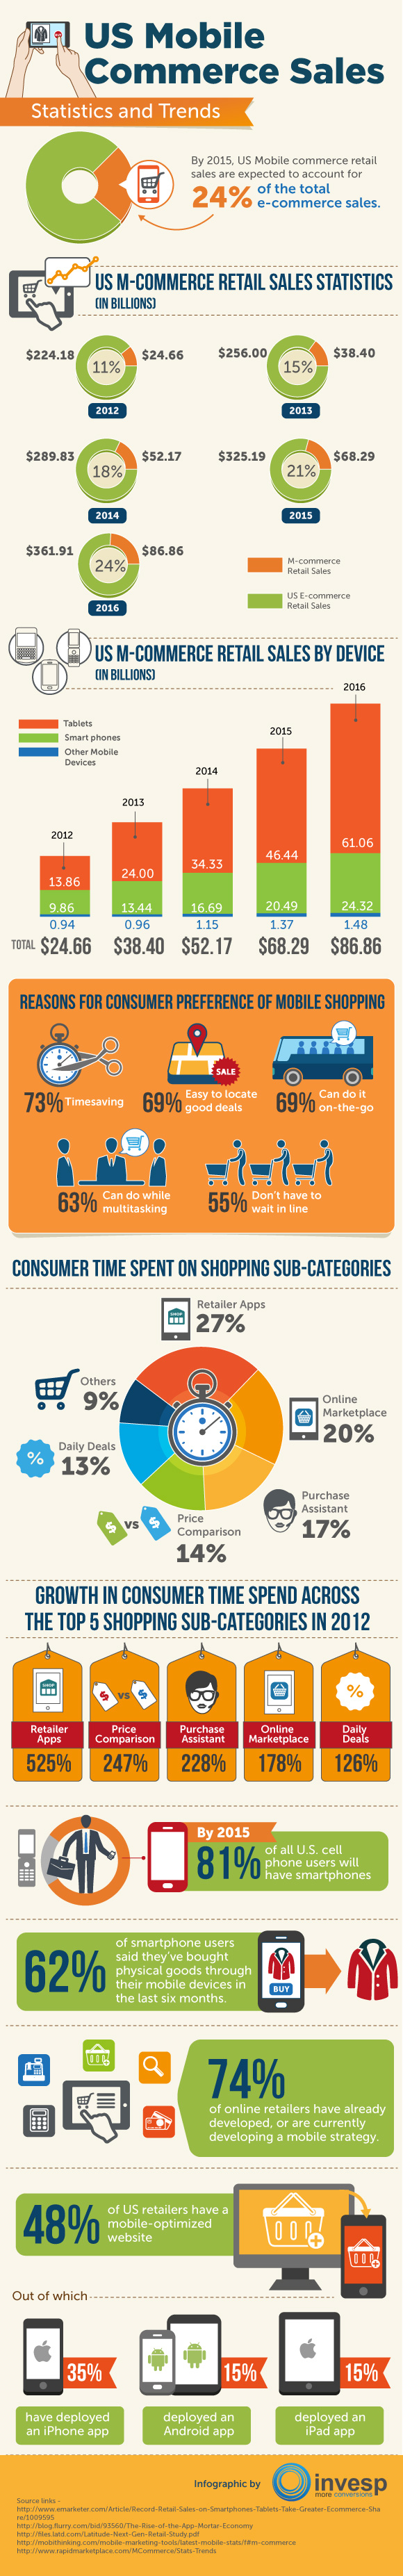 US Mobile Commerce Sales- Statistics and Trends